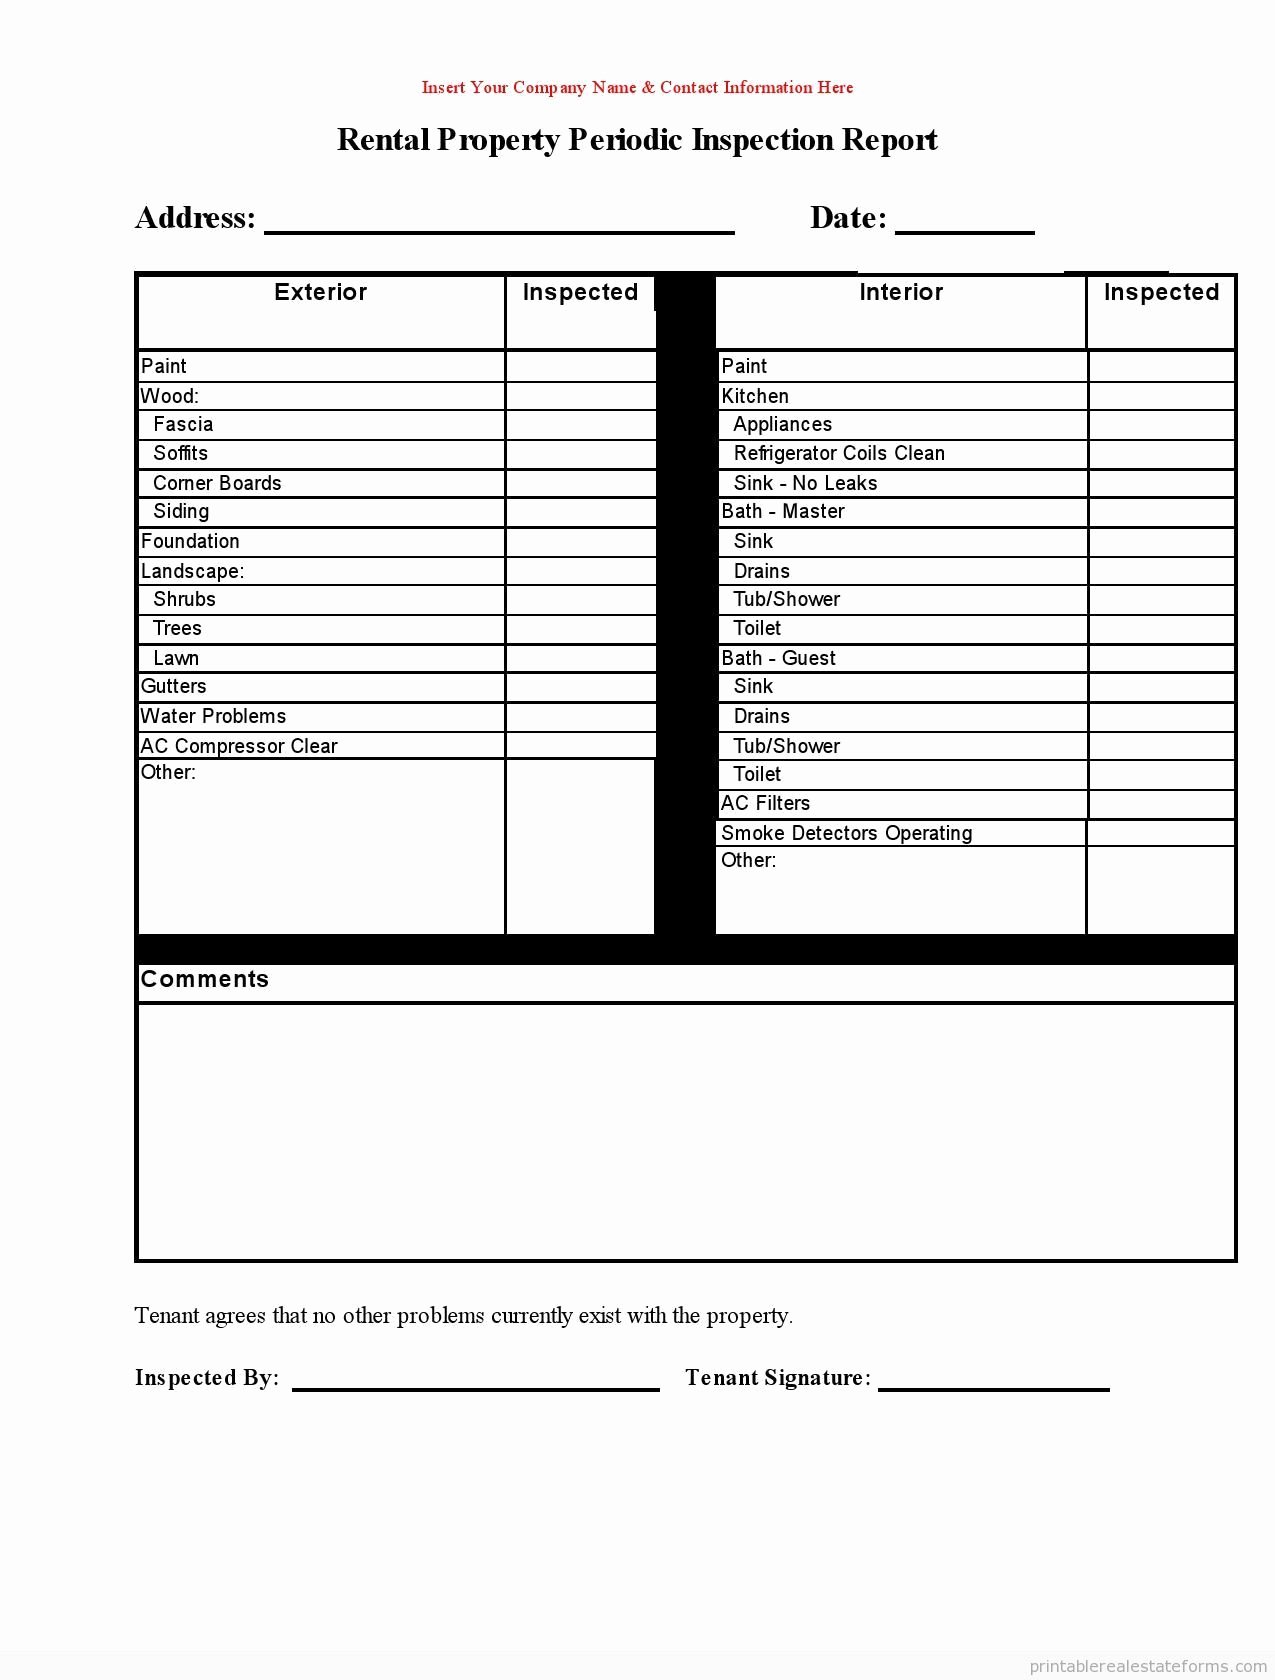 Free Printable Rental Property Periodic Inspection Report